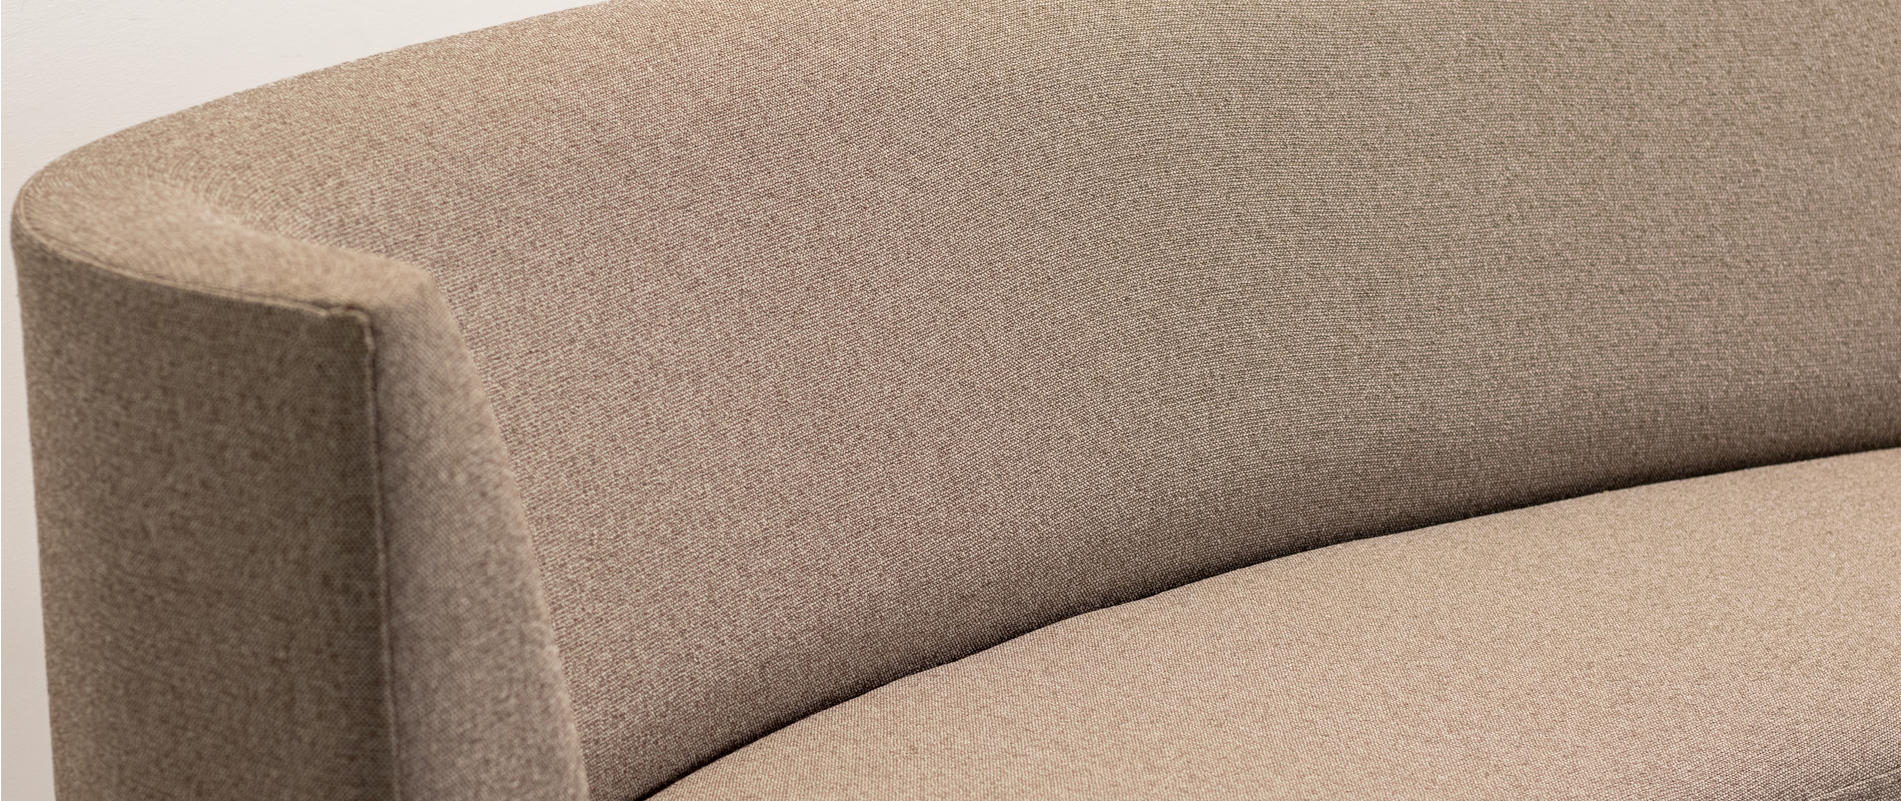 curved taupe sofa up close details